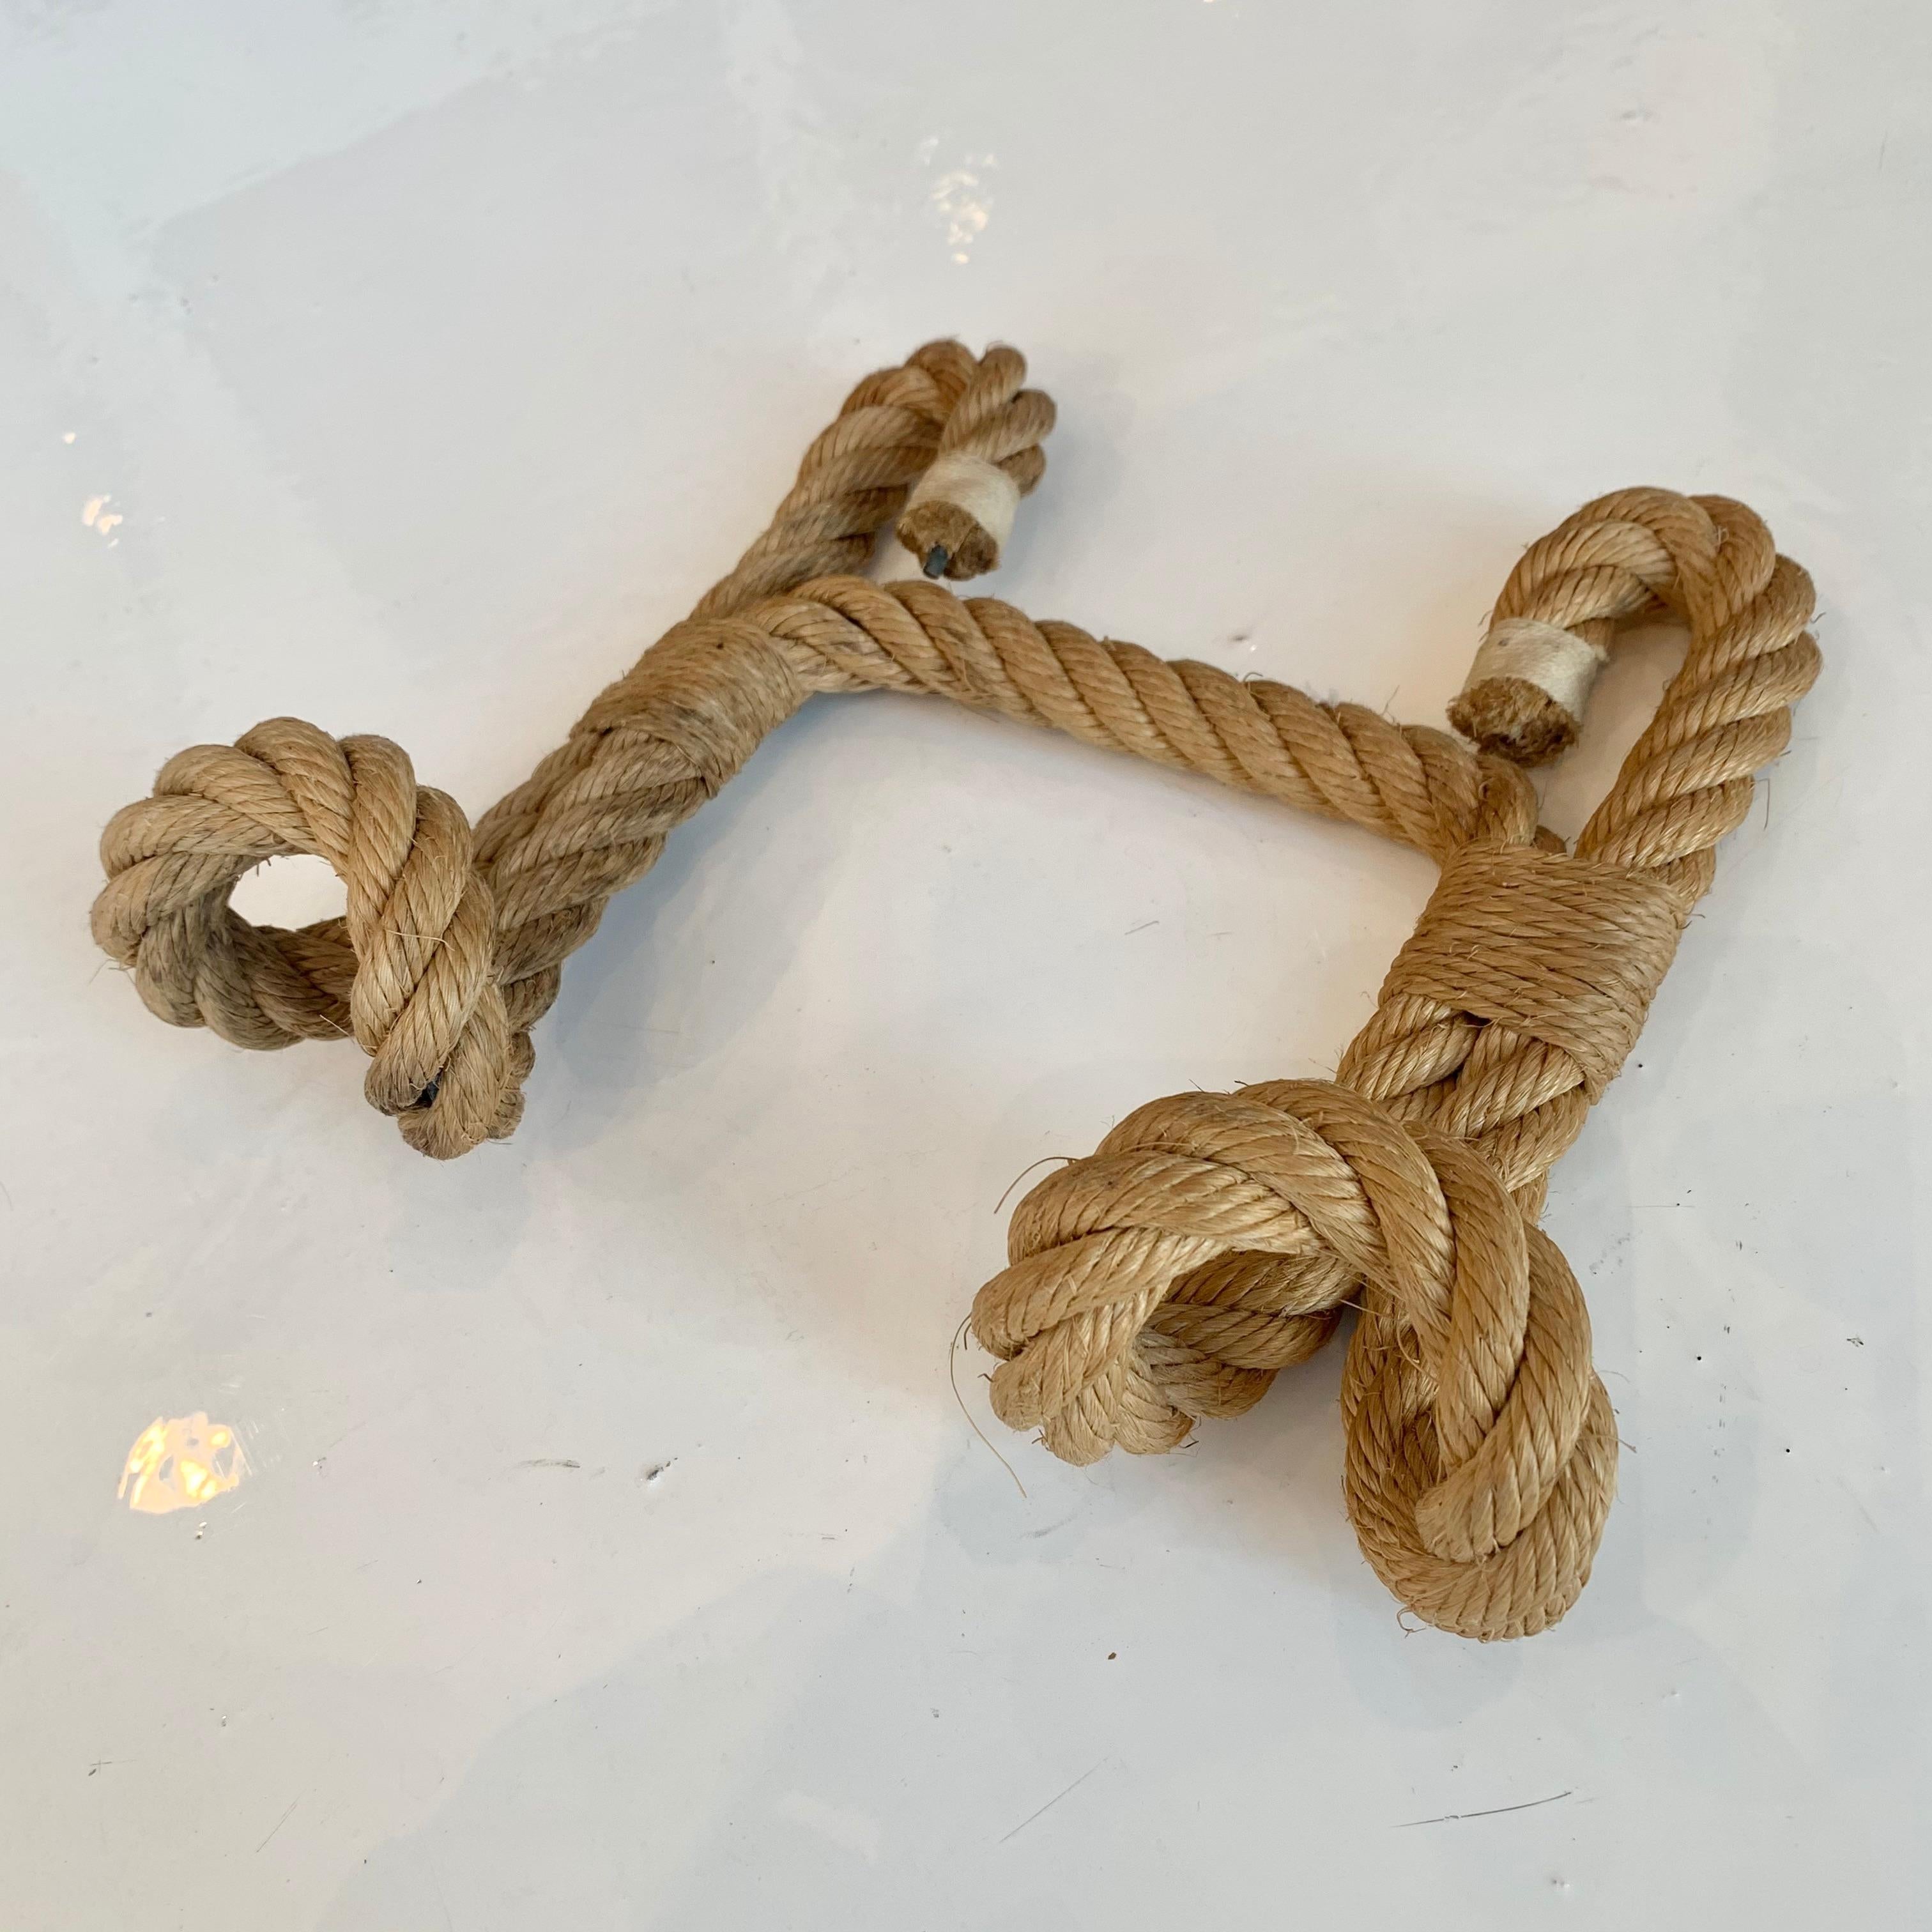 Handsome rope coat rack by Audoux and Minet. Completely wrapped in rope and held together by twine. Three tongue hooks with double strand of rope throughout. Great looking wall item. Good vintage condition with very minor wear. Perfect for hats or